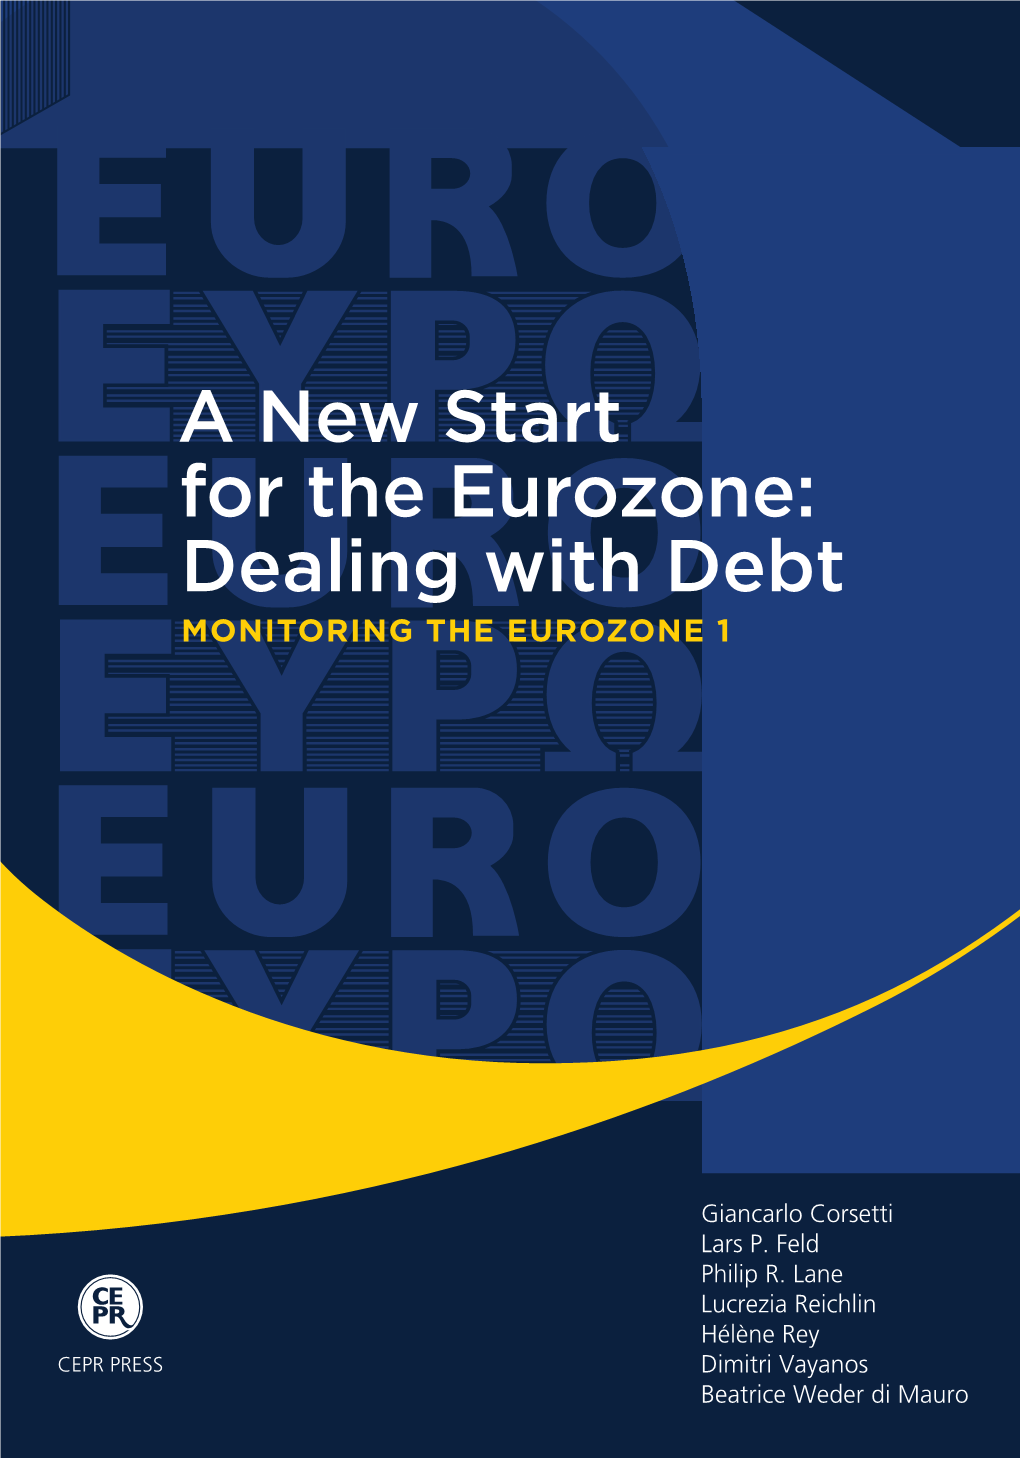 A New Start for the Eurozone: Dealing with Debt